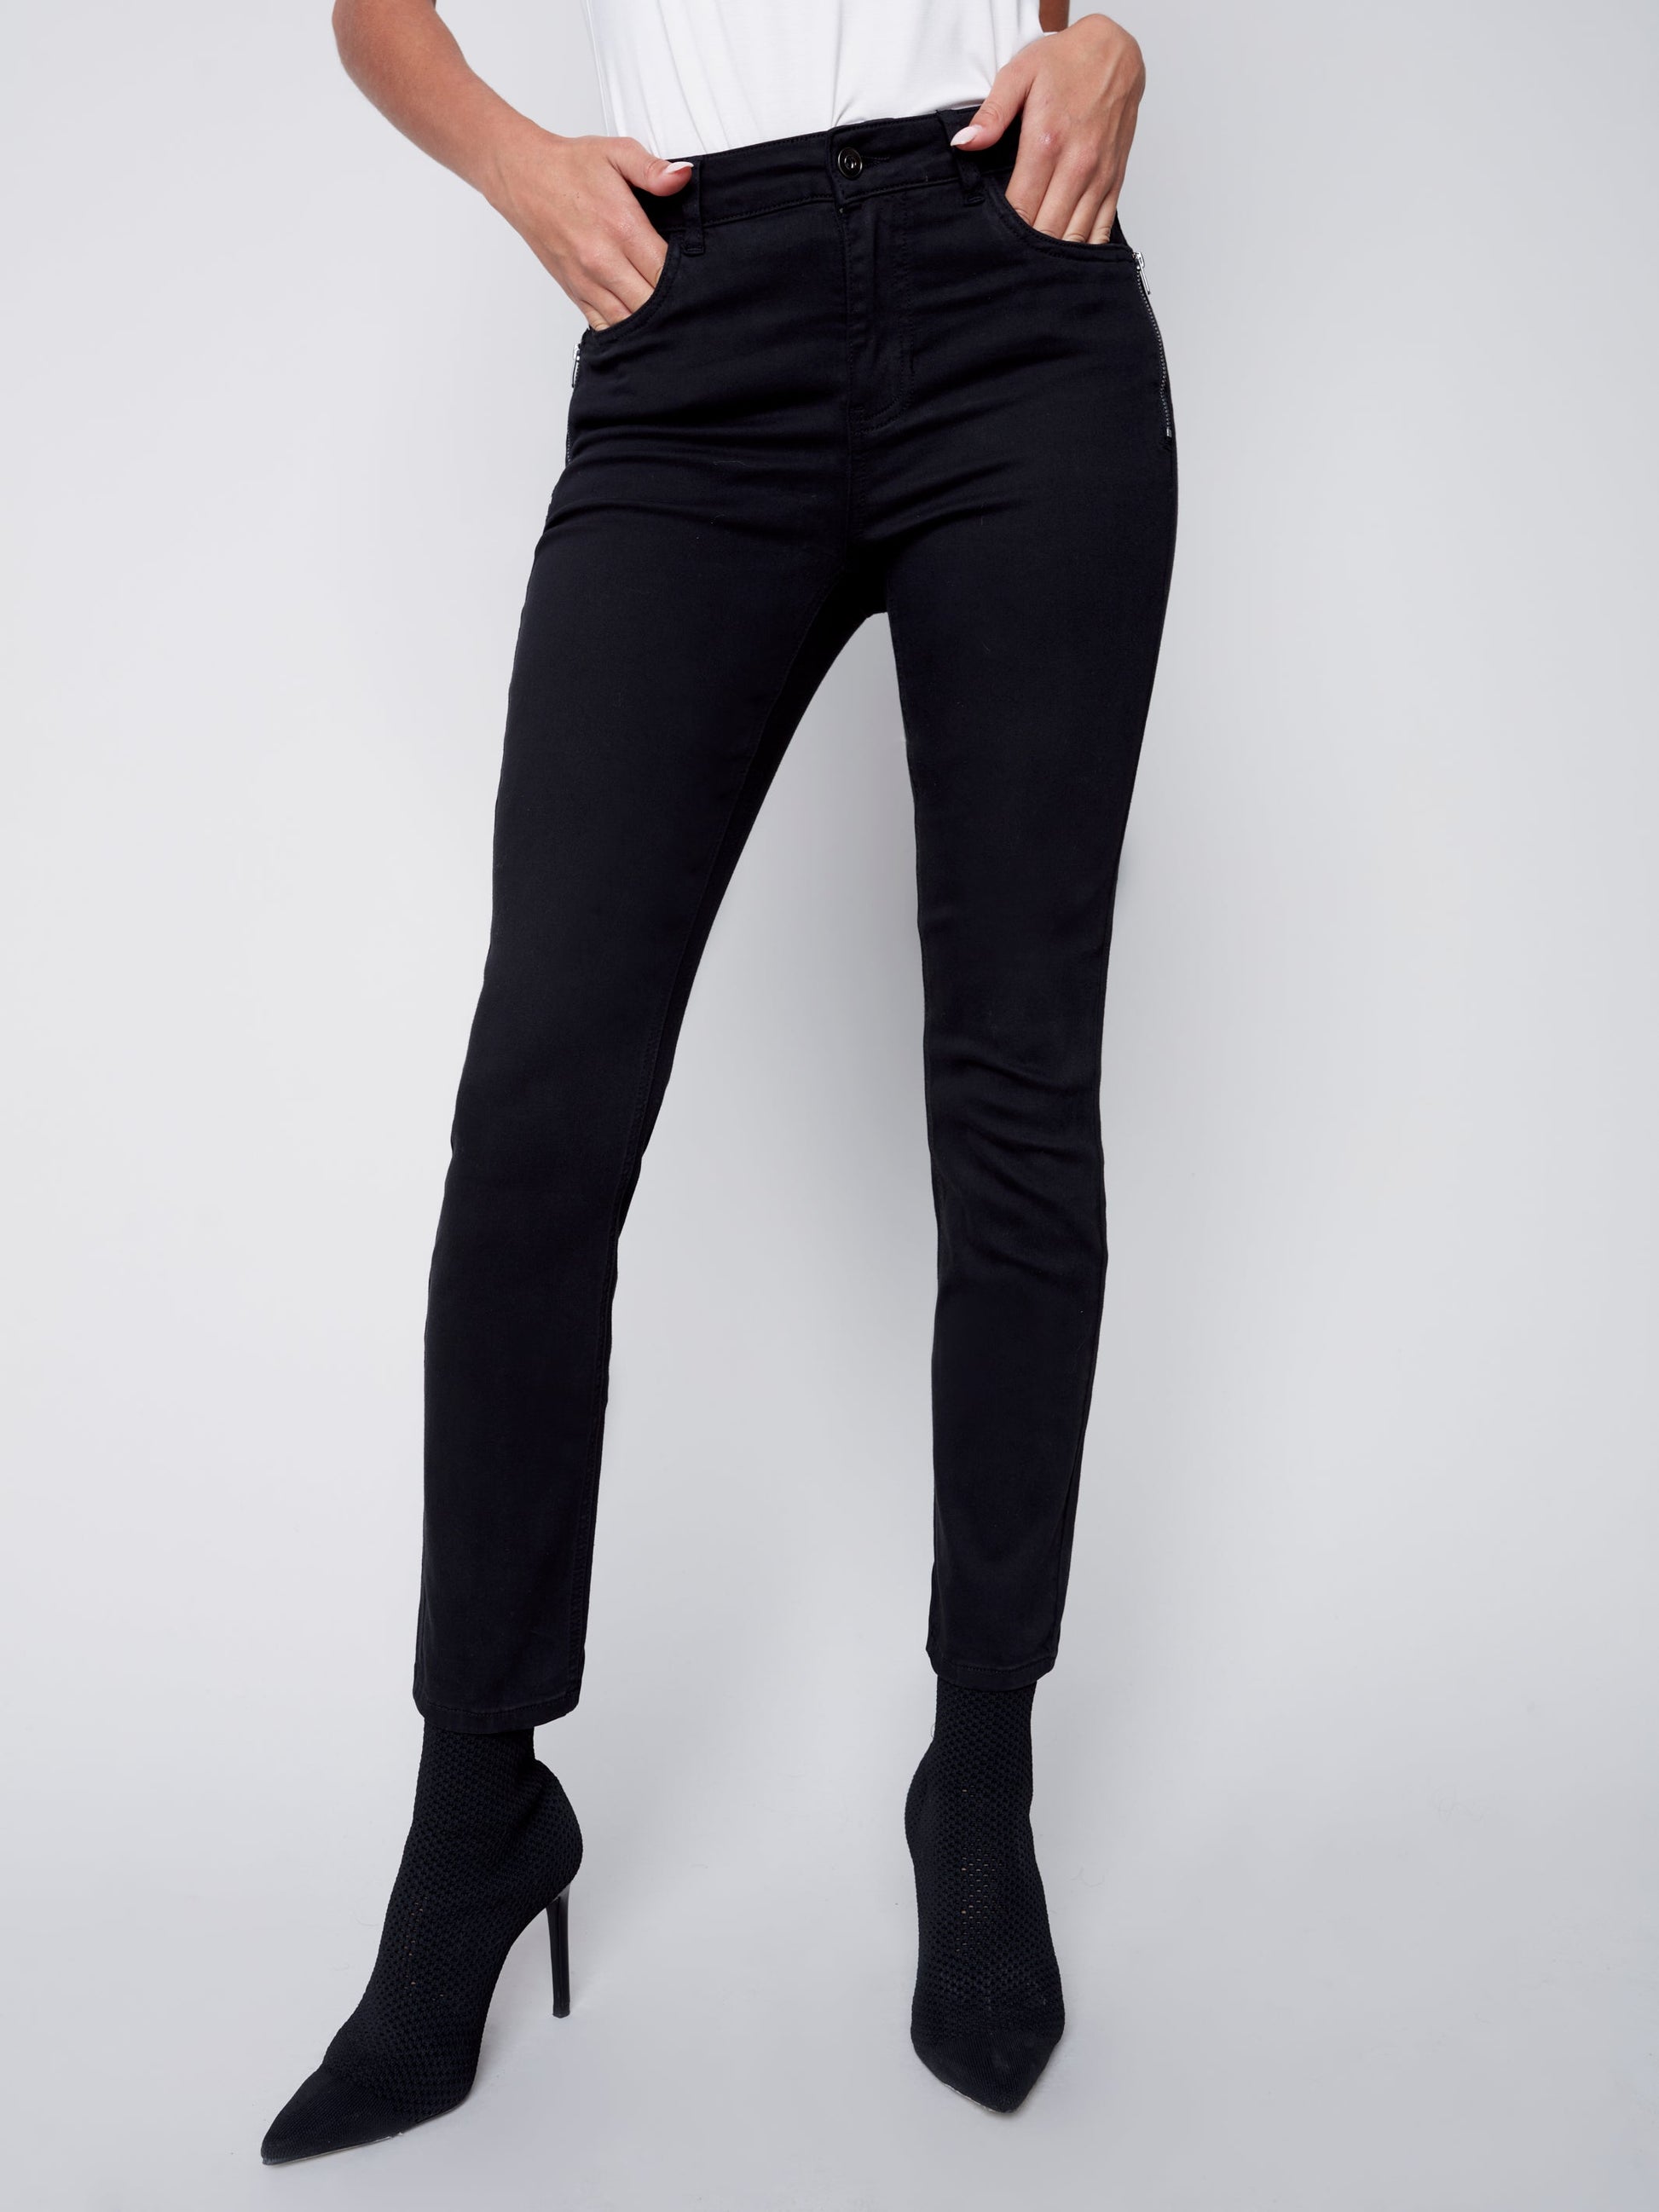 High Waist Stretchy Skinny Jeans With Side Pockets And Washed Denim Pencil Trouser  Jeans For Women For Women Streetwear Style 210322 From Bai04, $21.27